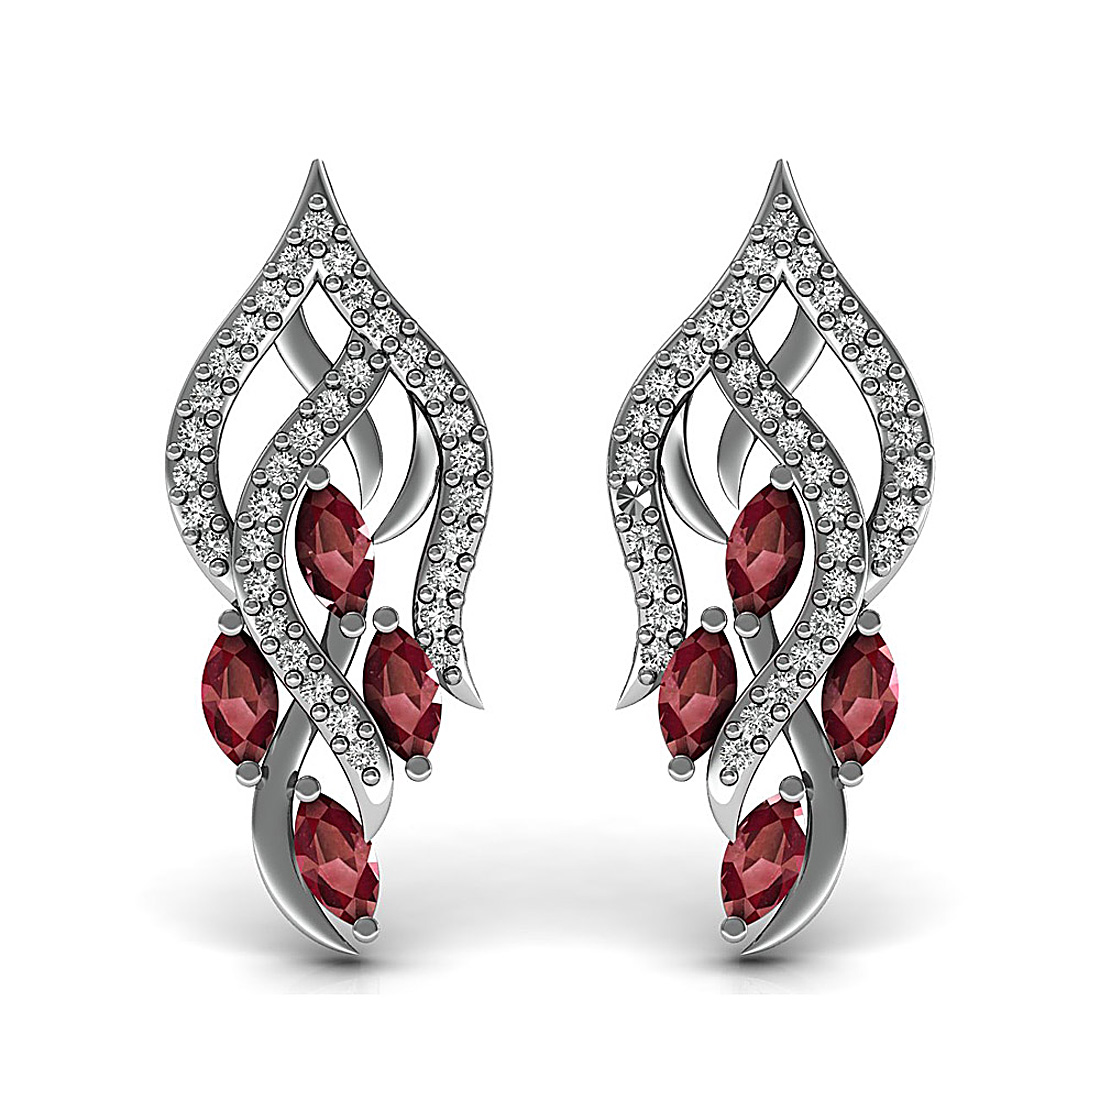 18K Solid white gold flower stud earrings studded with natural ruby and genuine diamond.